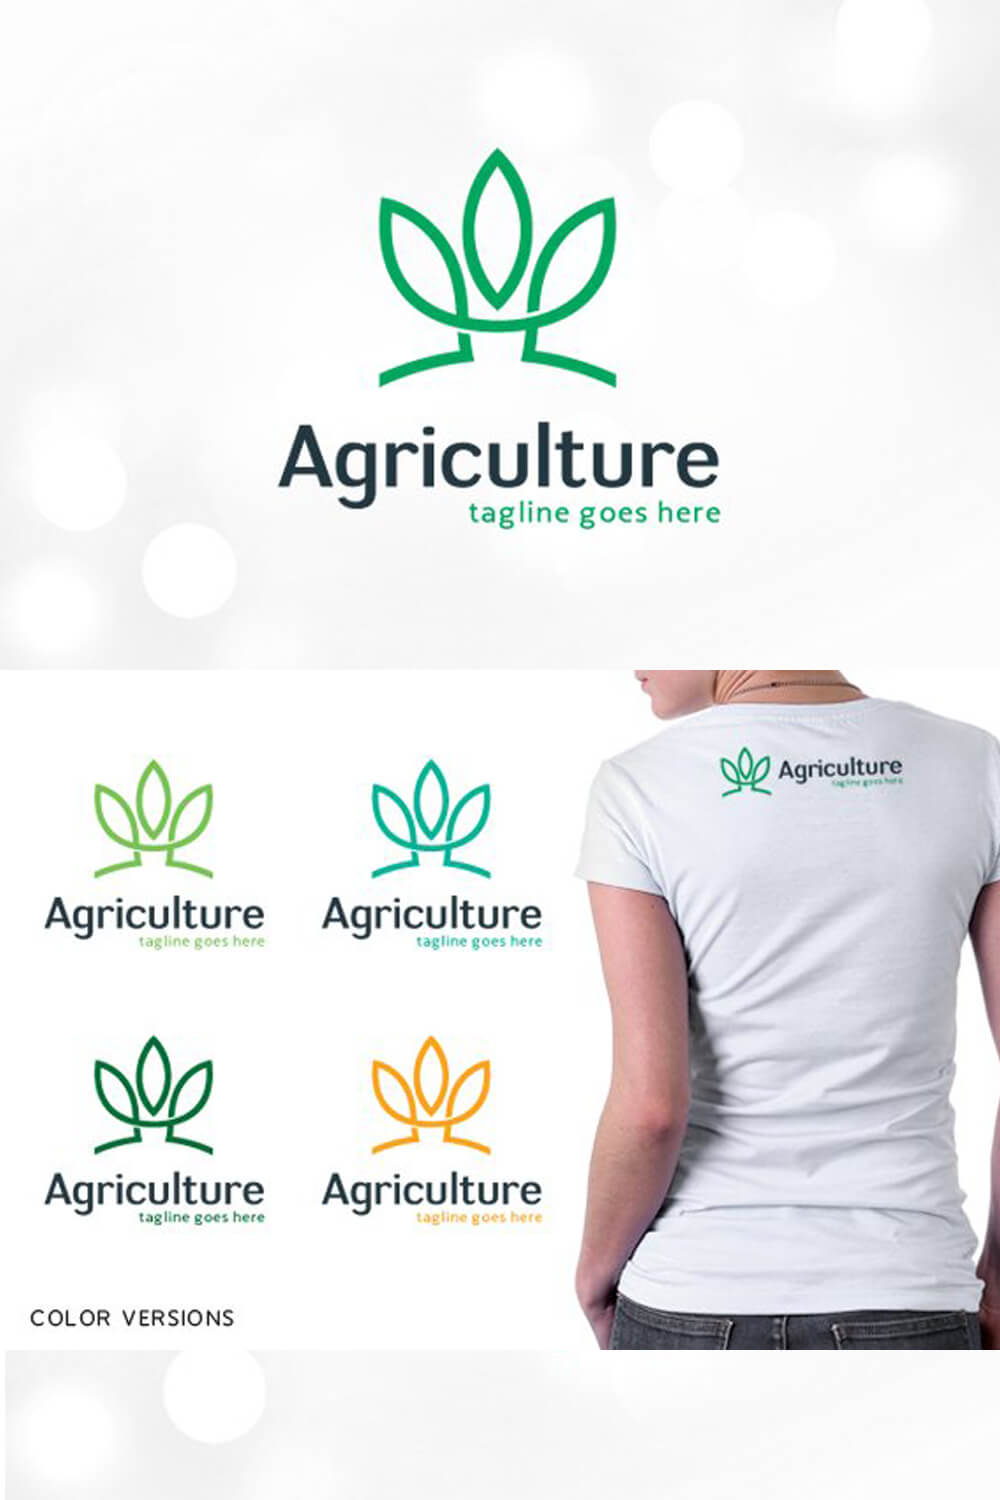 Four colors to apply the agriculture logo on a white t-shirt.